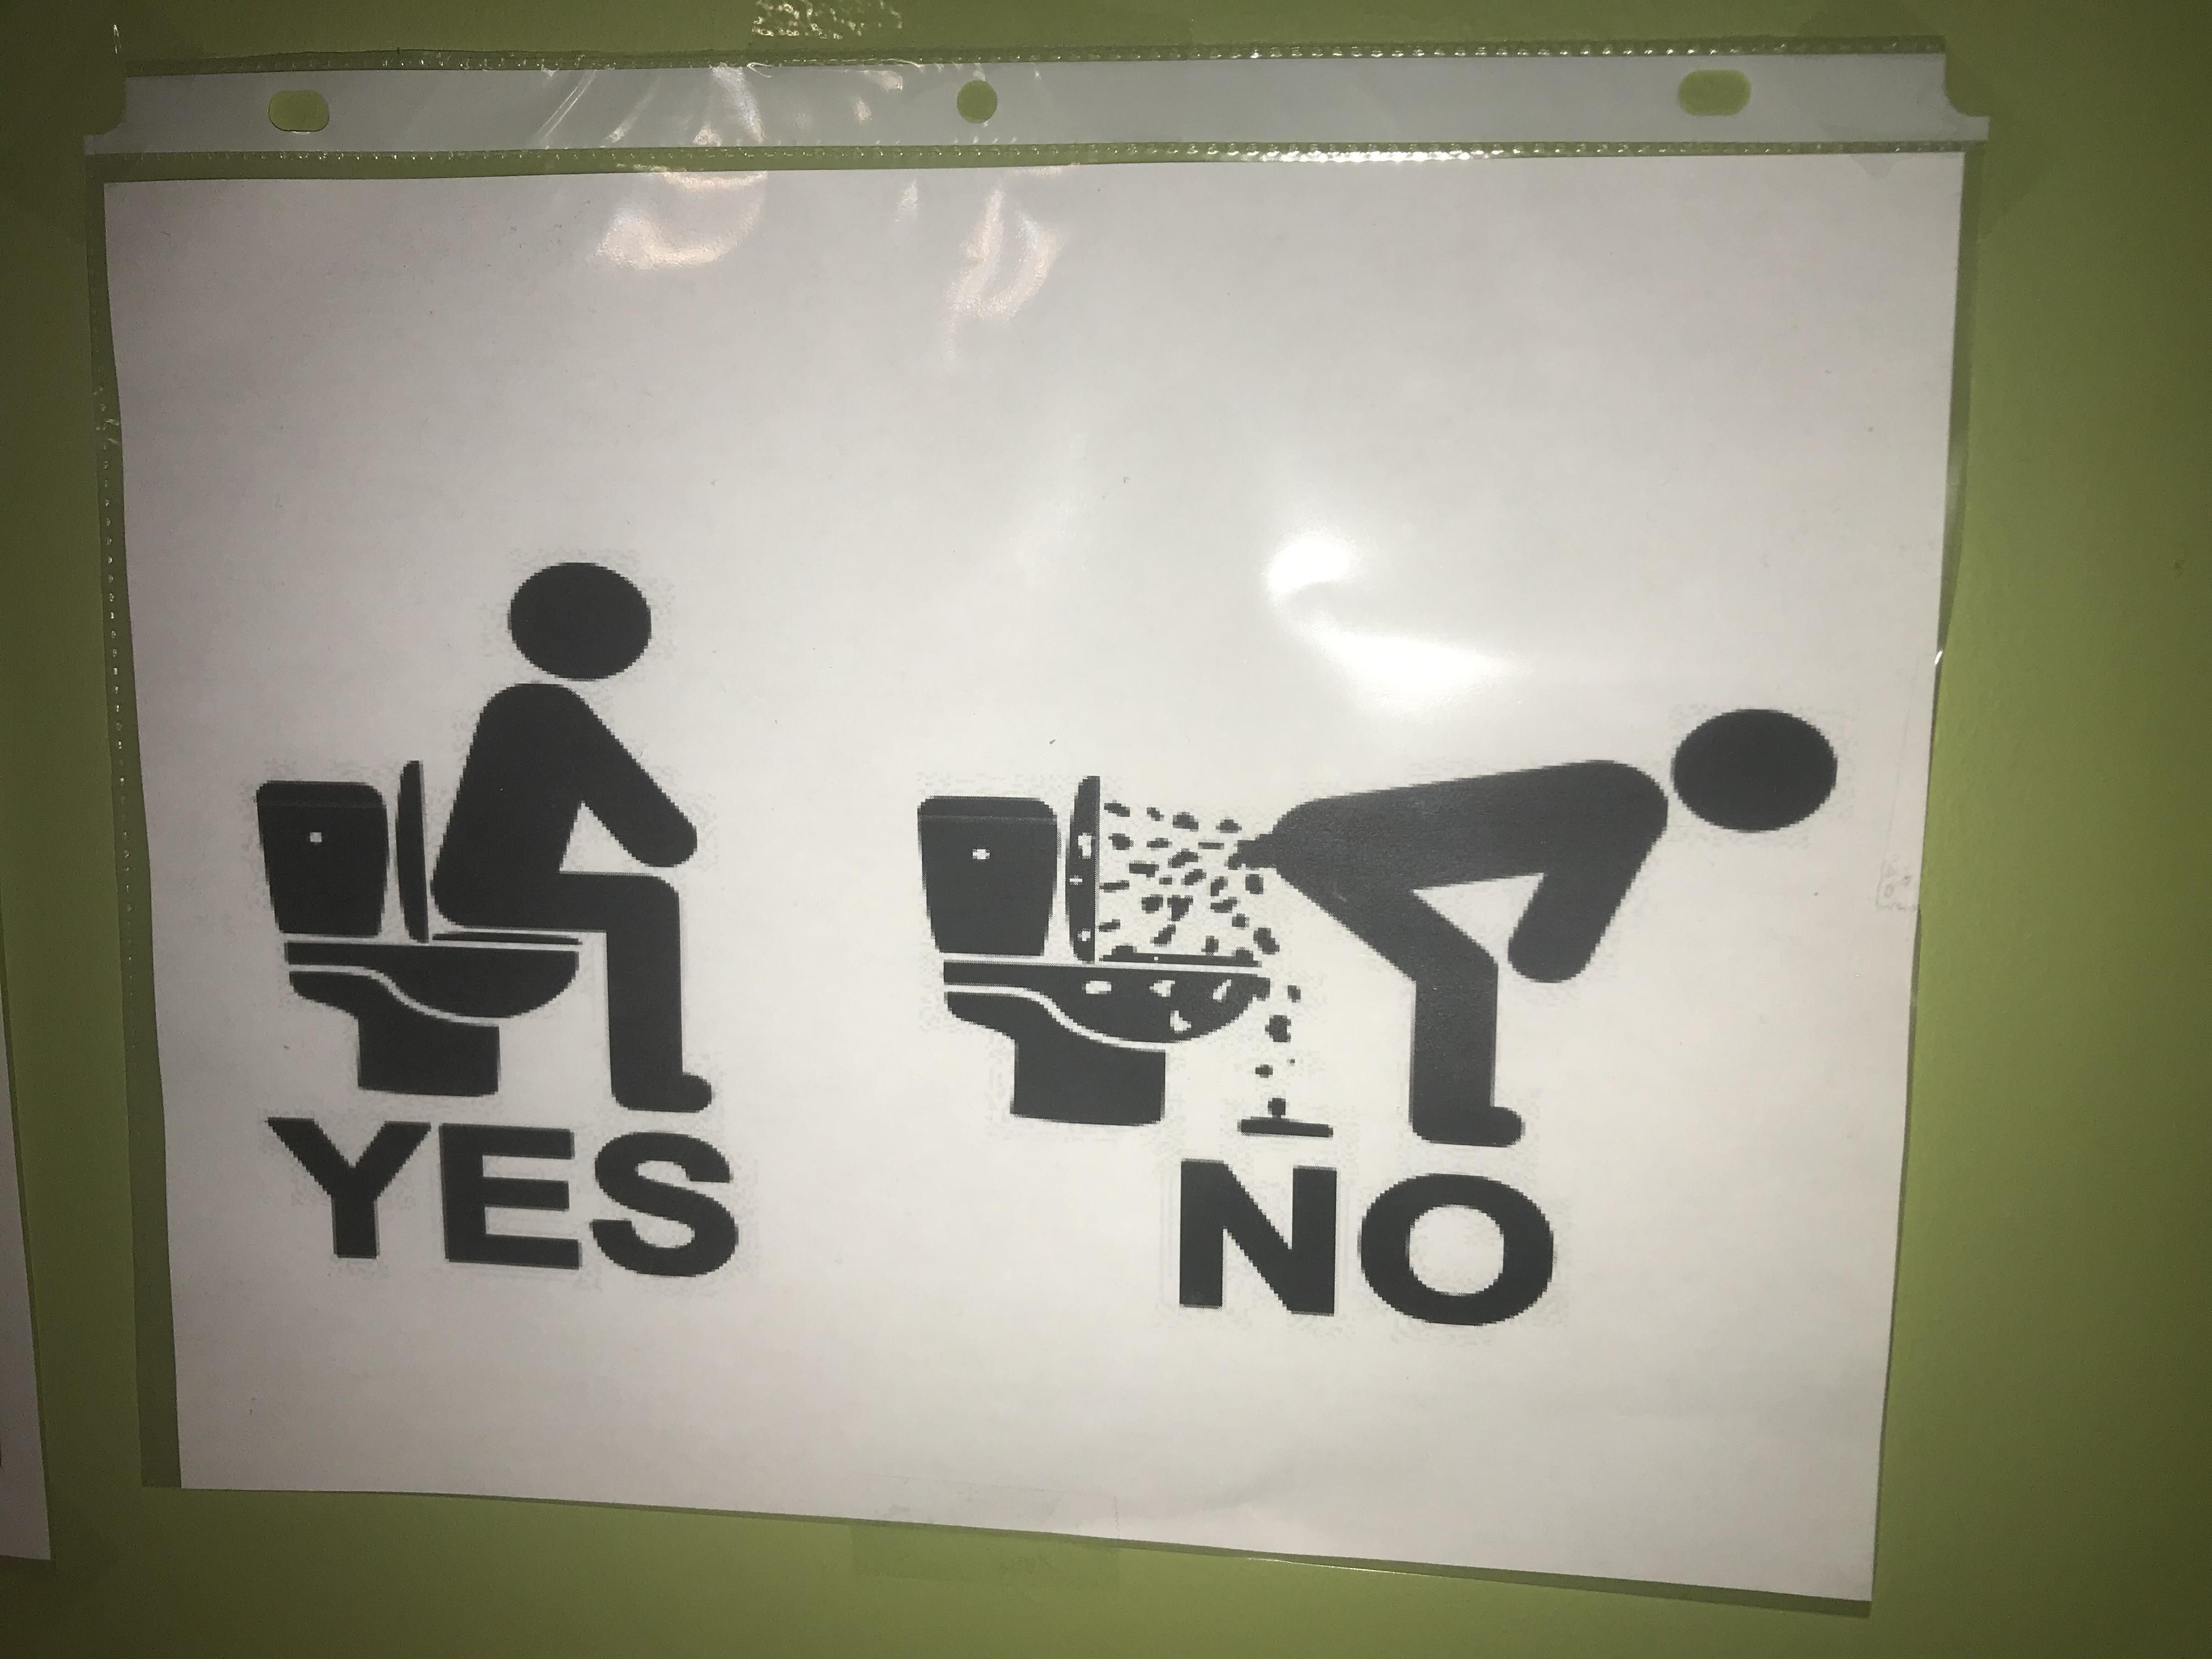 Coffee shop bathroom sign...can only imagine what happened to prompt this sign?